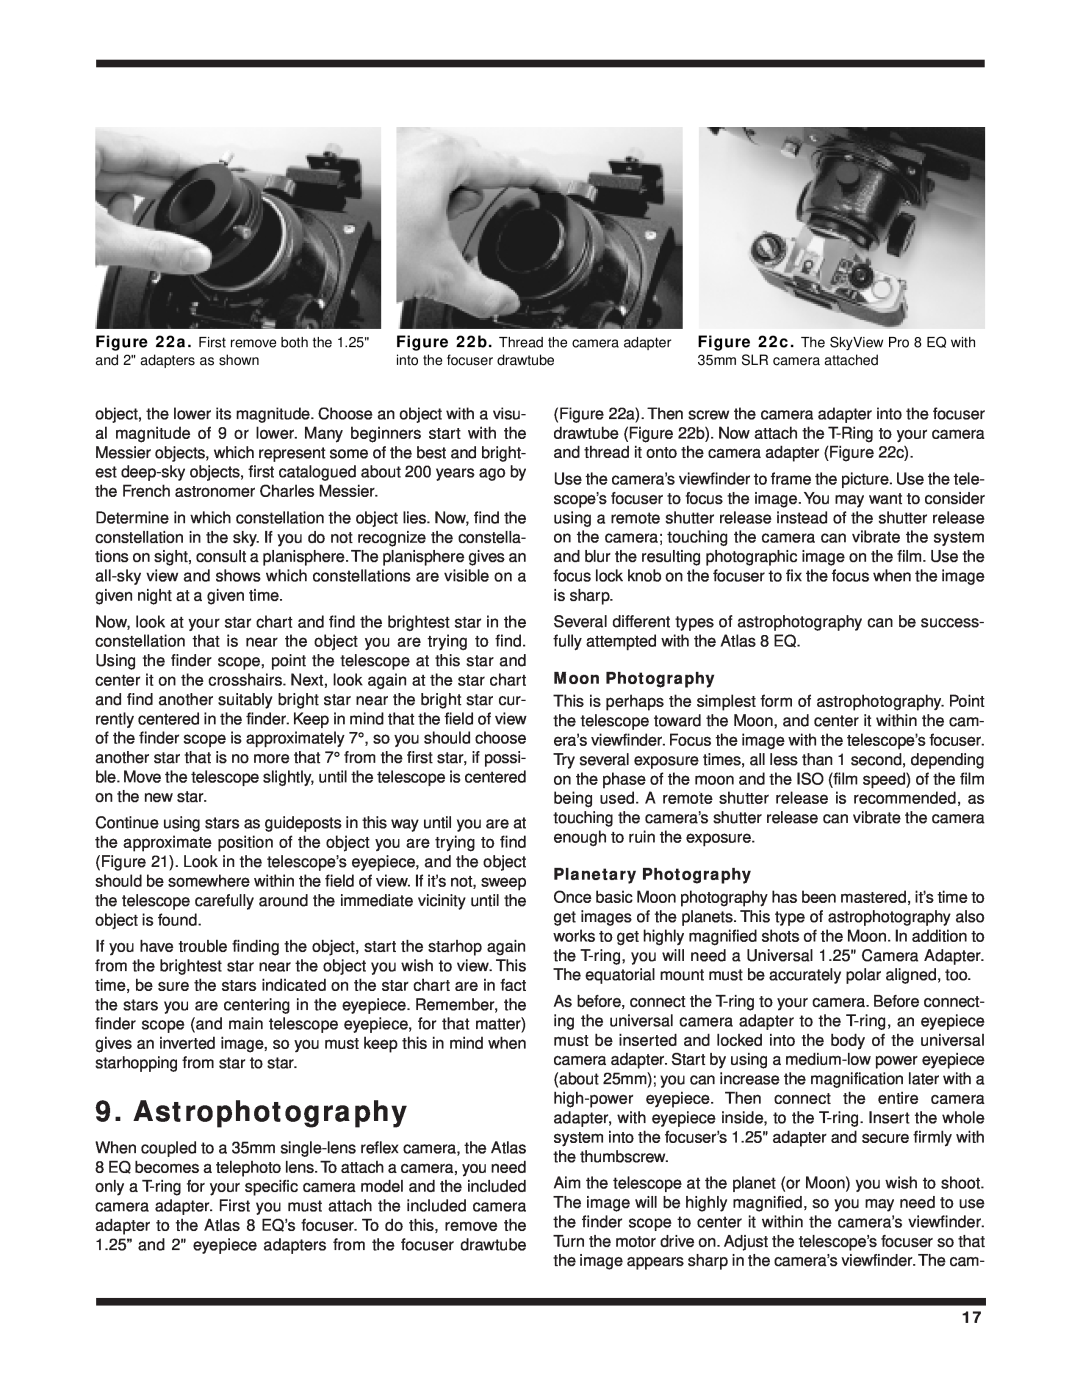 Orion 8 EQ instruction manual Astrophotography, Moon Photography, Planetary Photography 